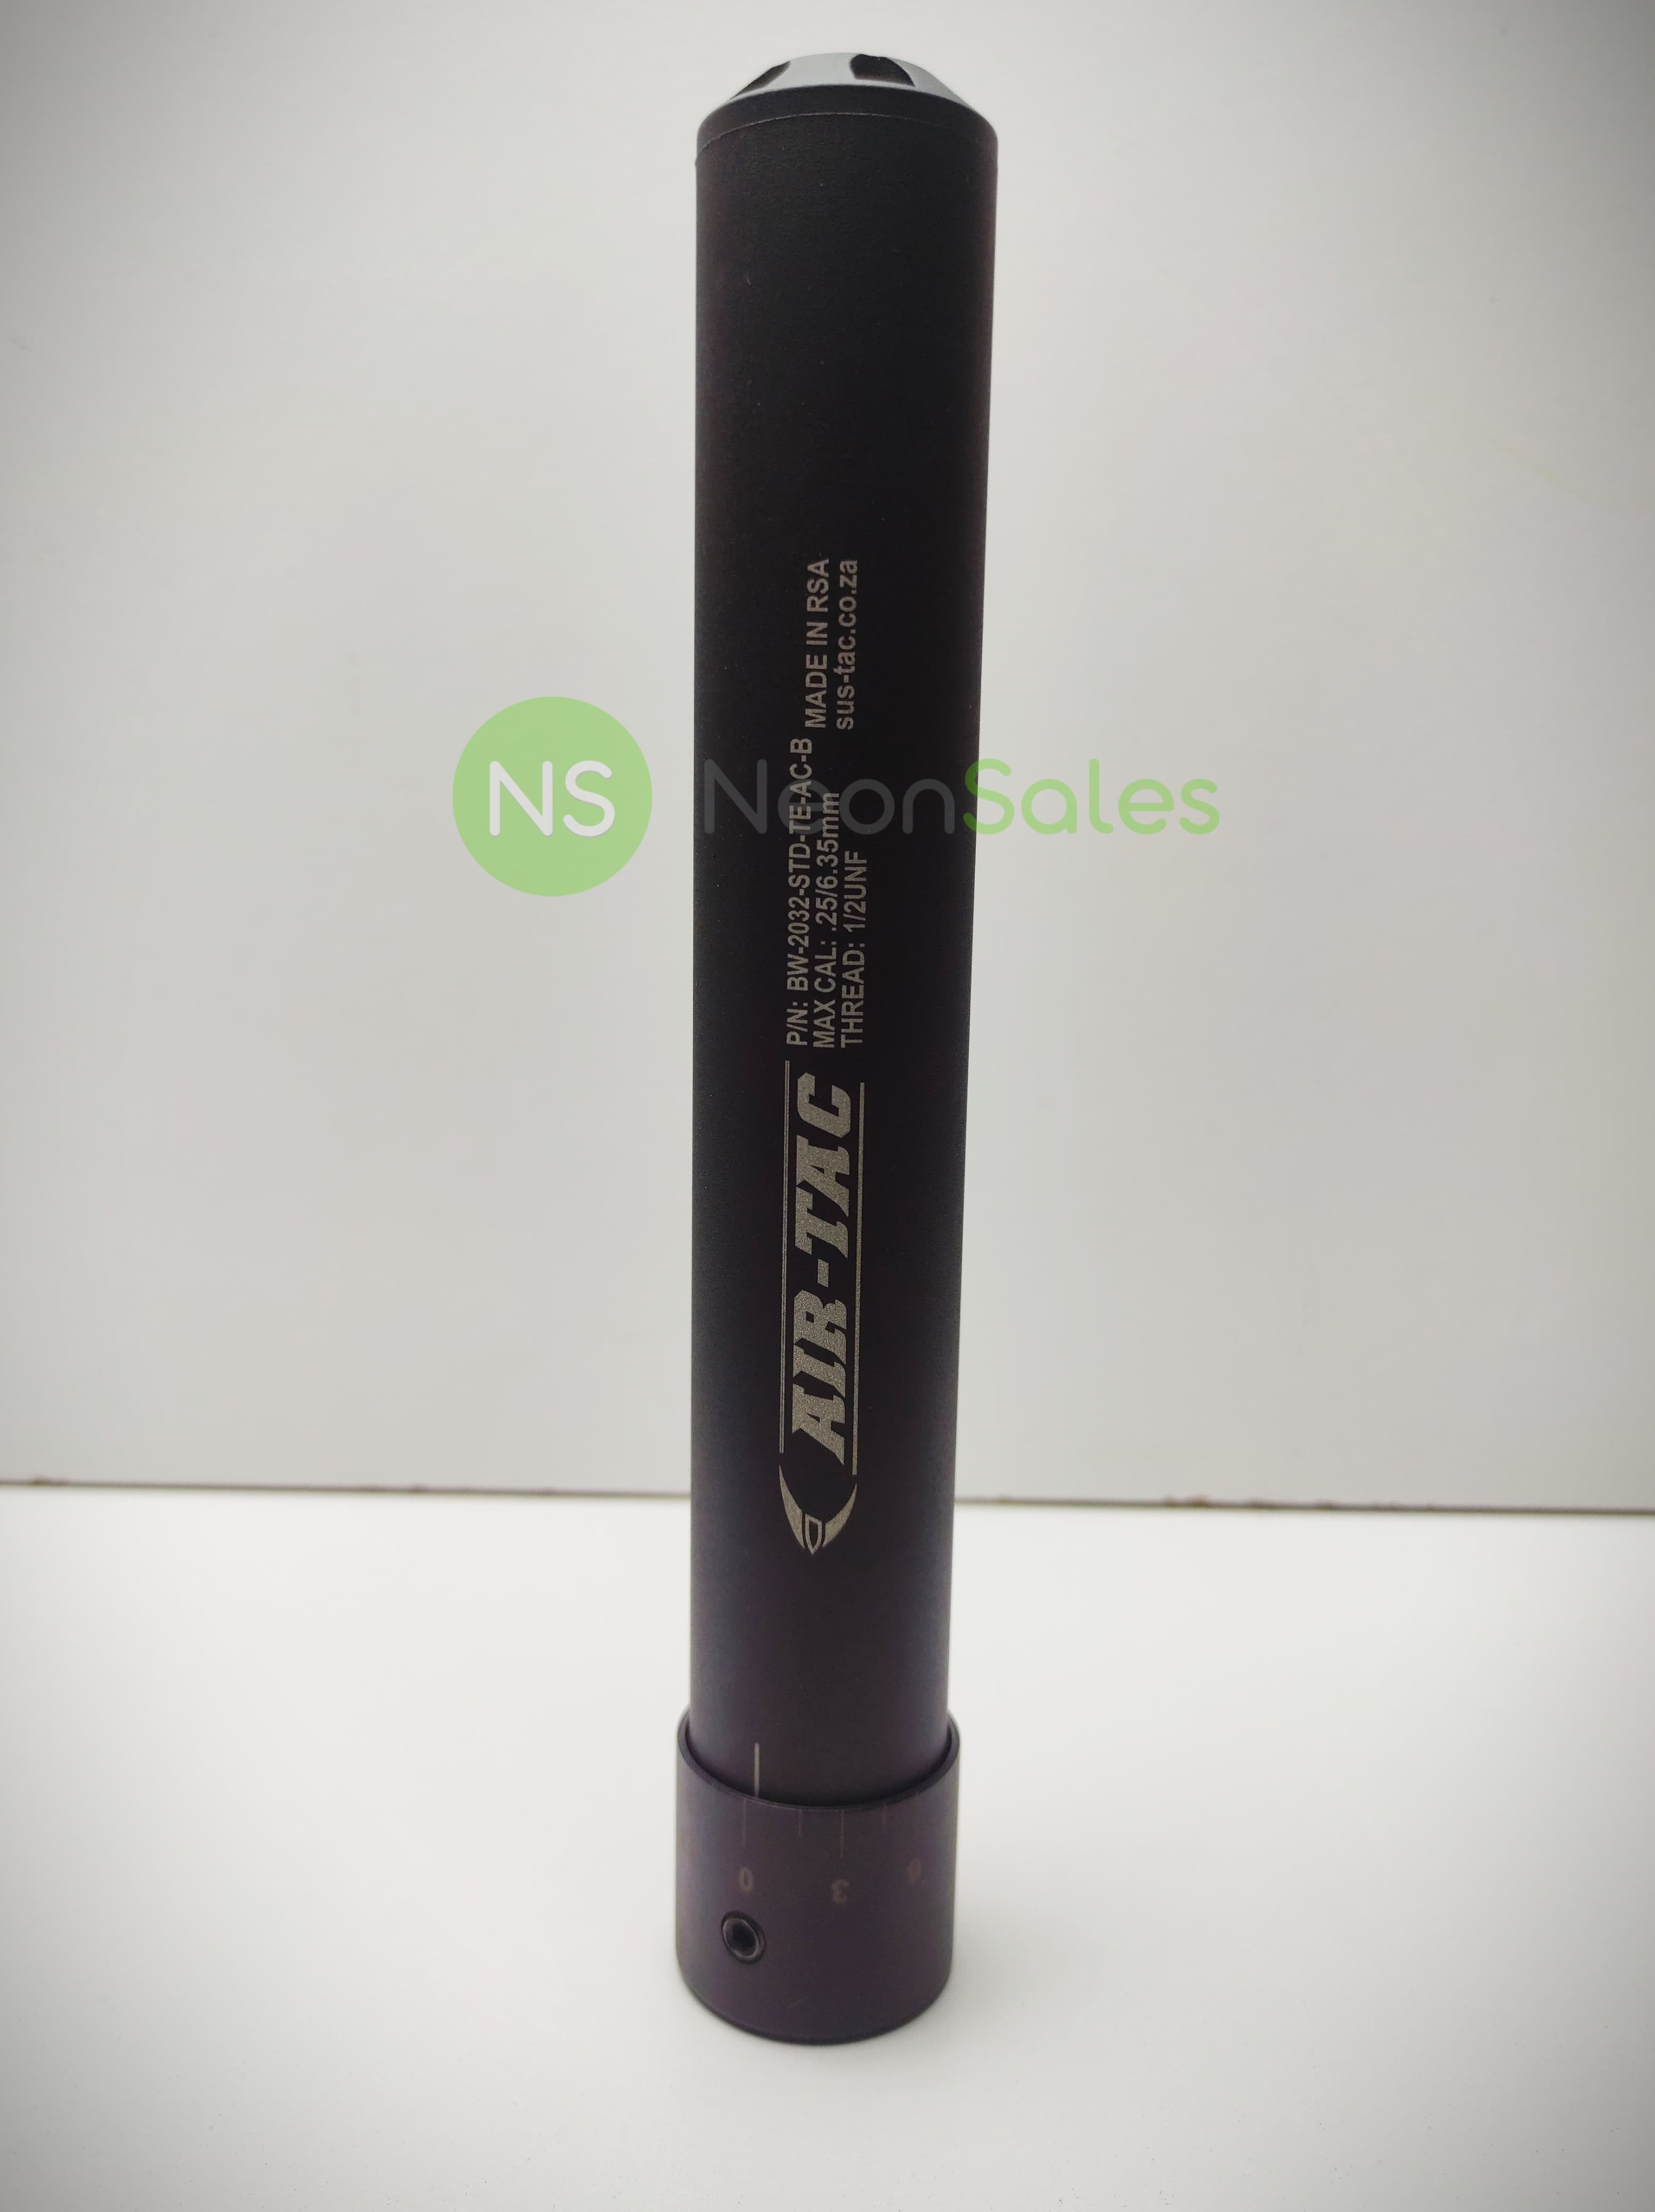 AIR-TAC SILENCER W/ TUNER (.22LR RATED), 1/2" UNF